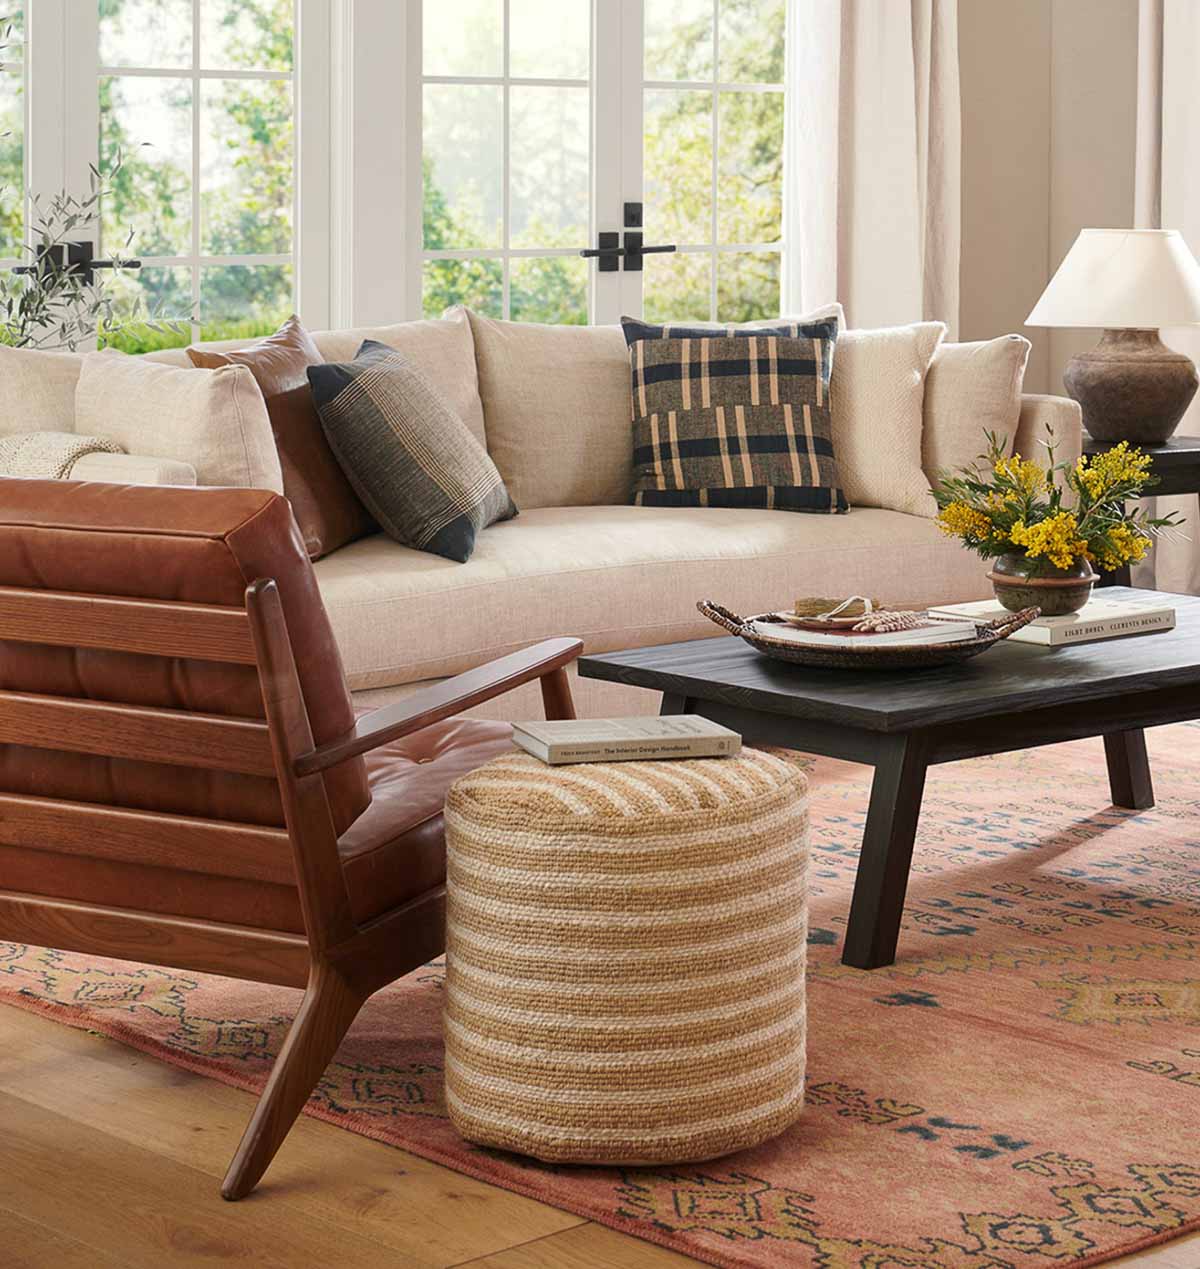 Striped jute pouf used as a side table - an example of decorating with poufs